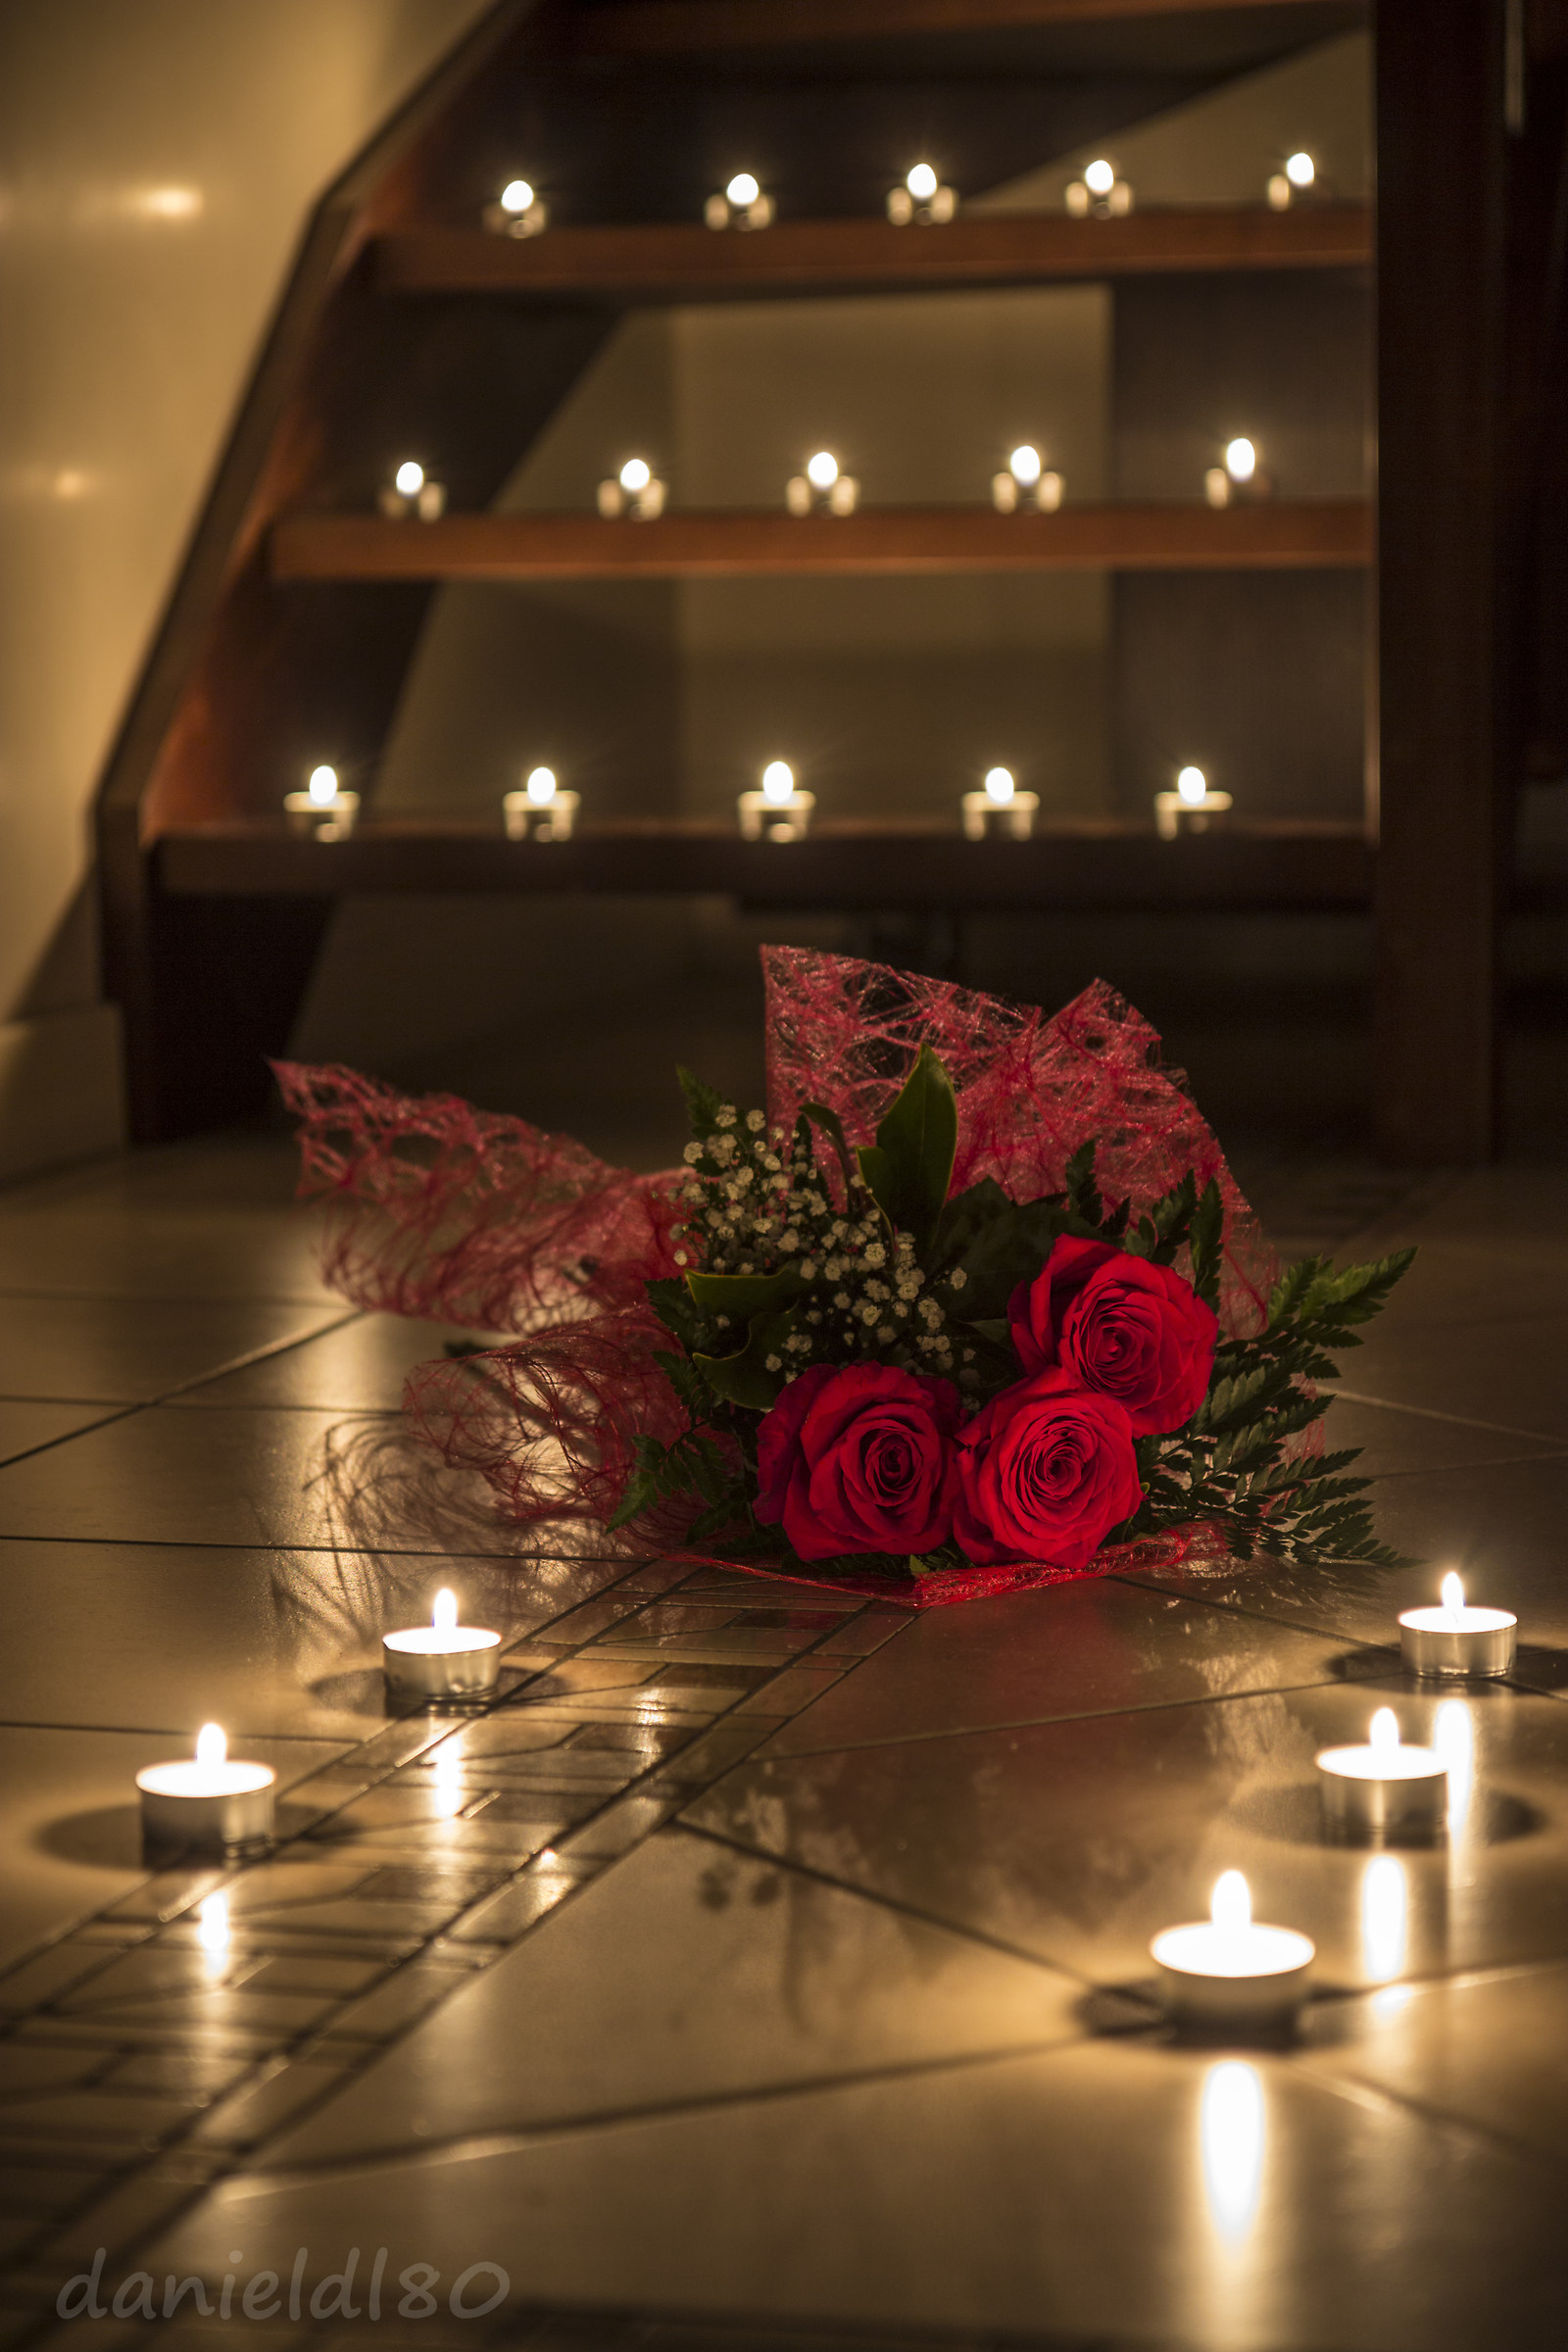 Red roses by candlelight...